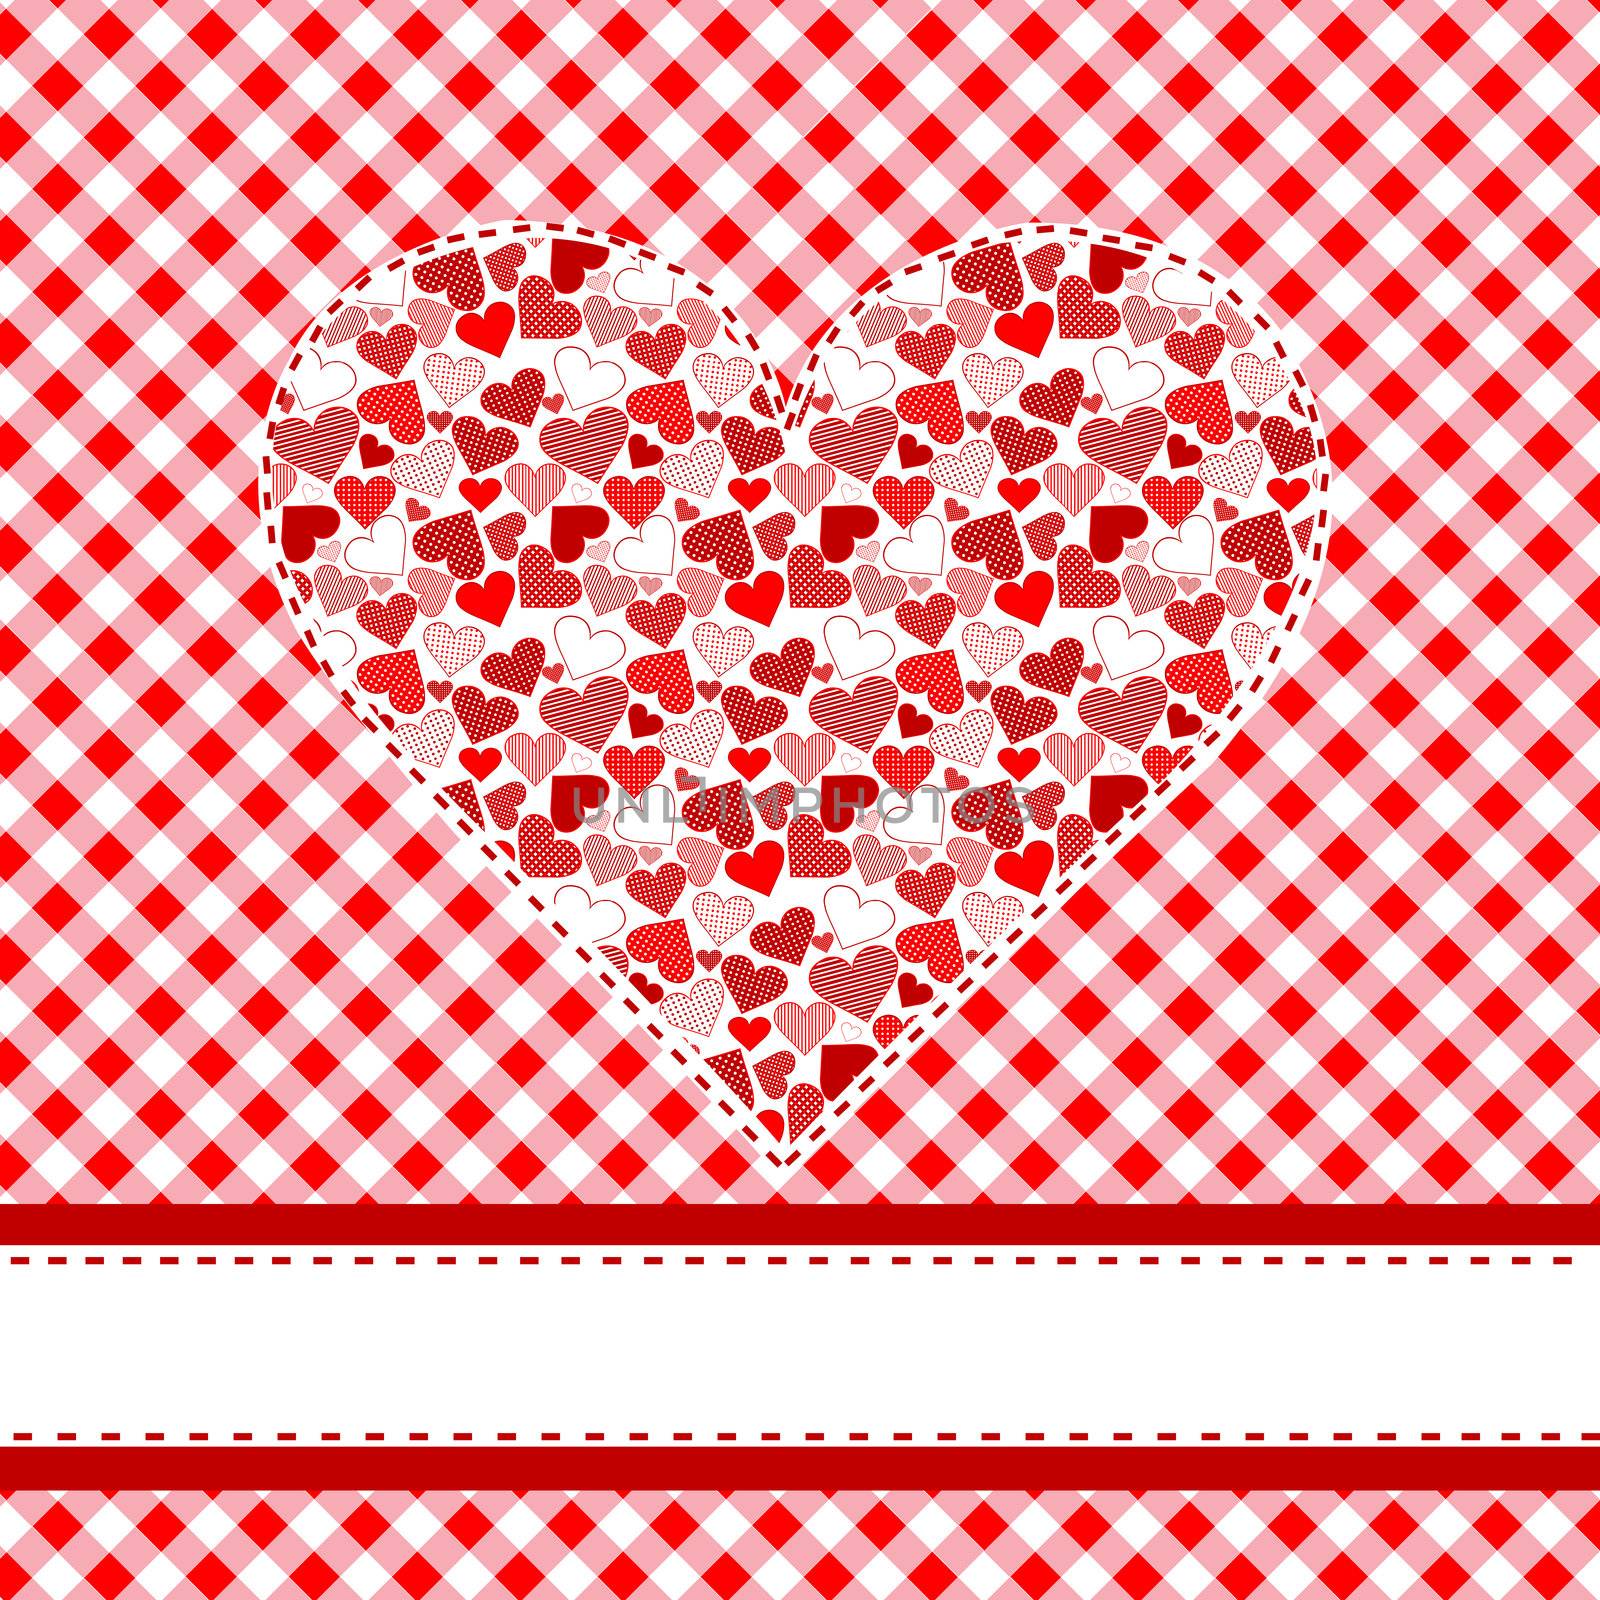 Textile patchwork heart over tablecloth by hibrida13